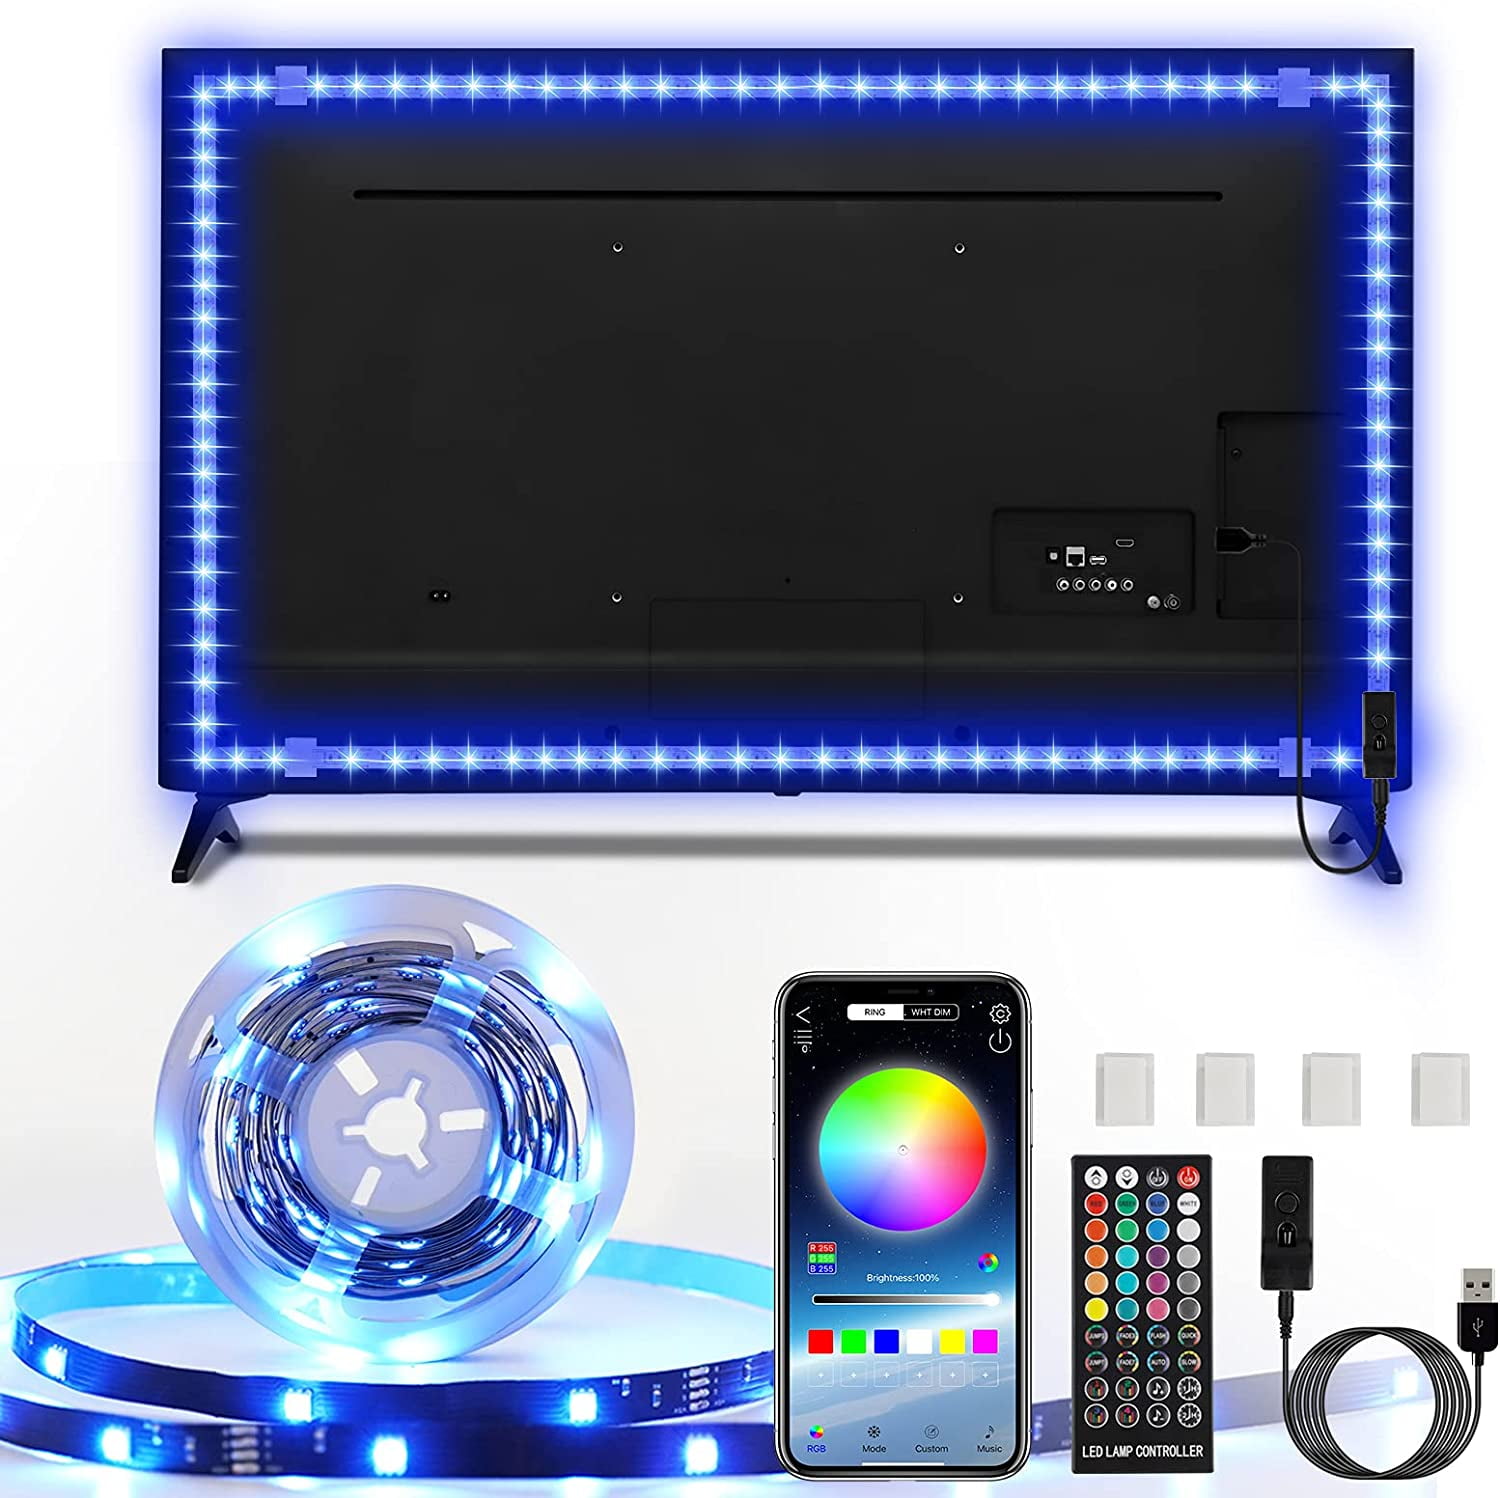 Enteenly LED Strip Lights, TV LED Lights for 60-75 inch, 16.8FT DIY Timing RGB LED with APP Control, Music Sync, USB TV LED Backlight with Remote for TV, PC,